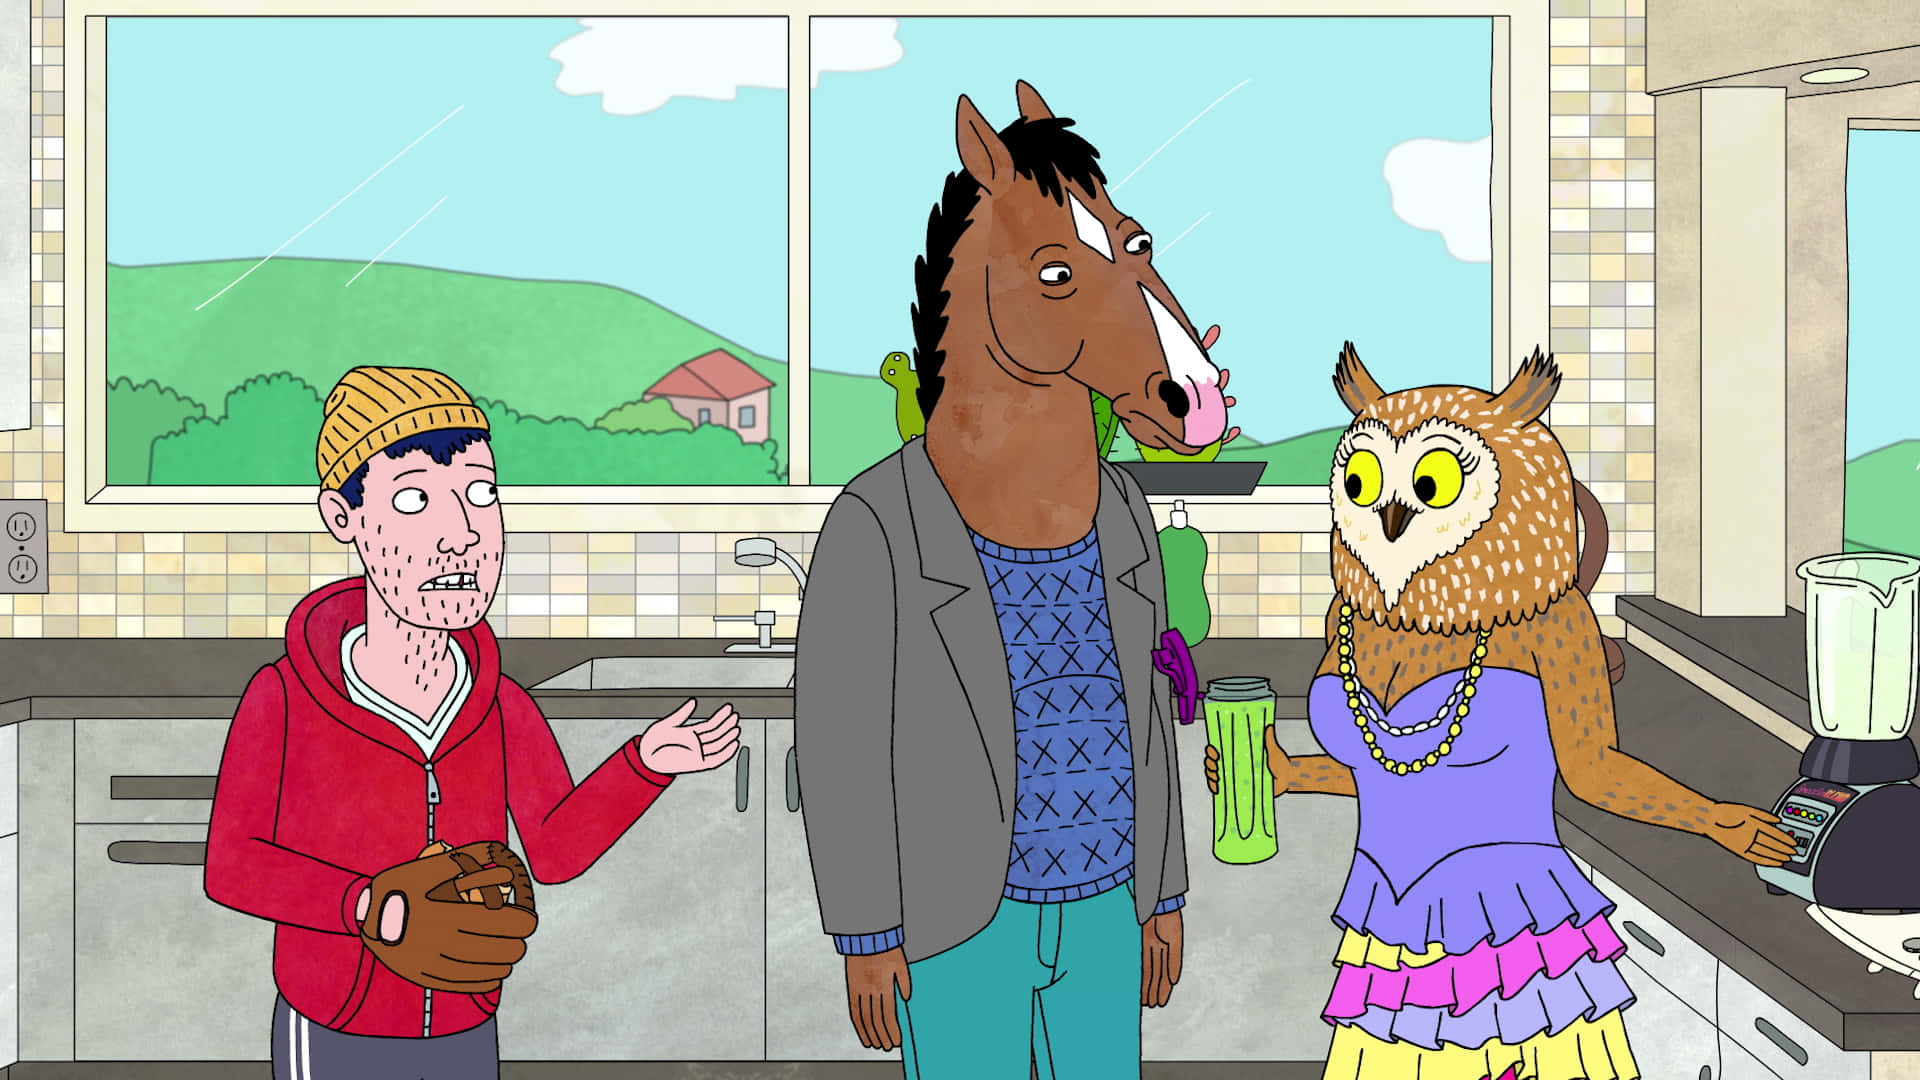 Bojack Horseman - A Horse With Something to Say